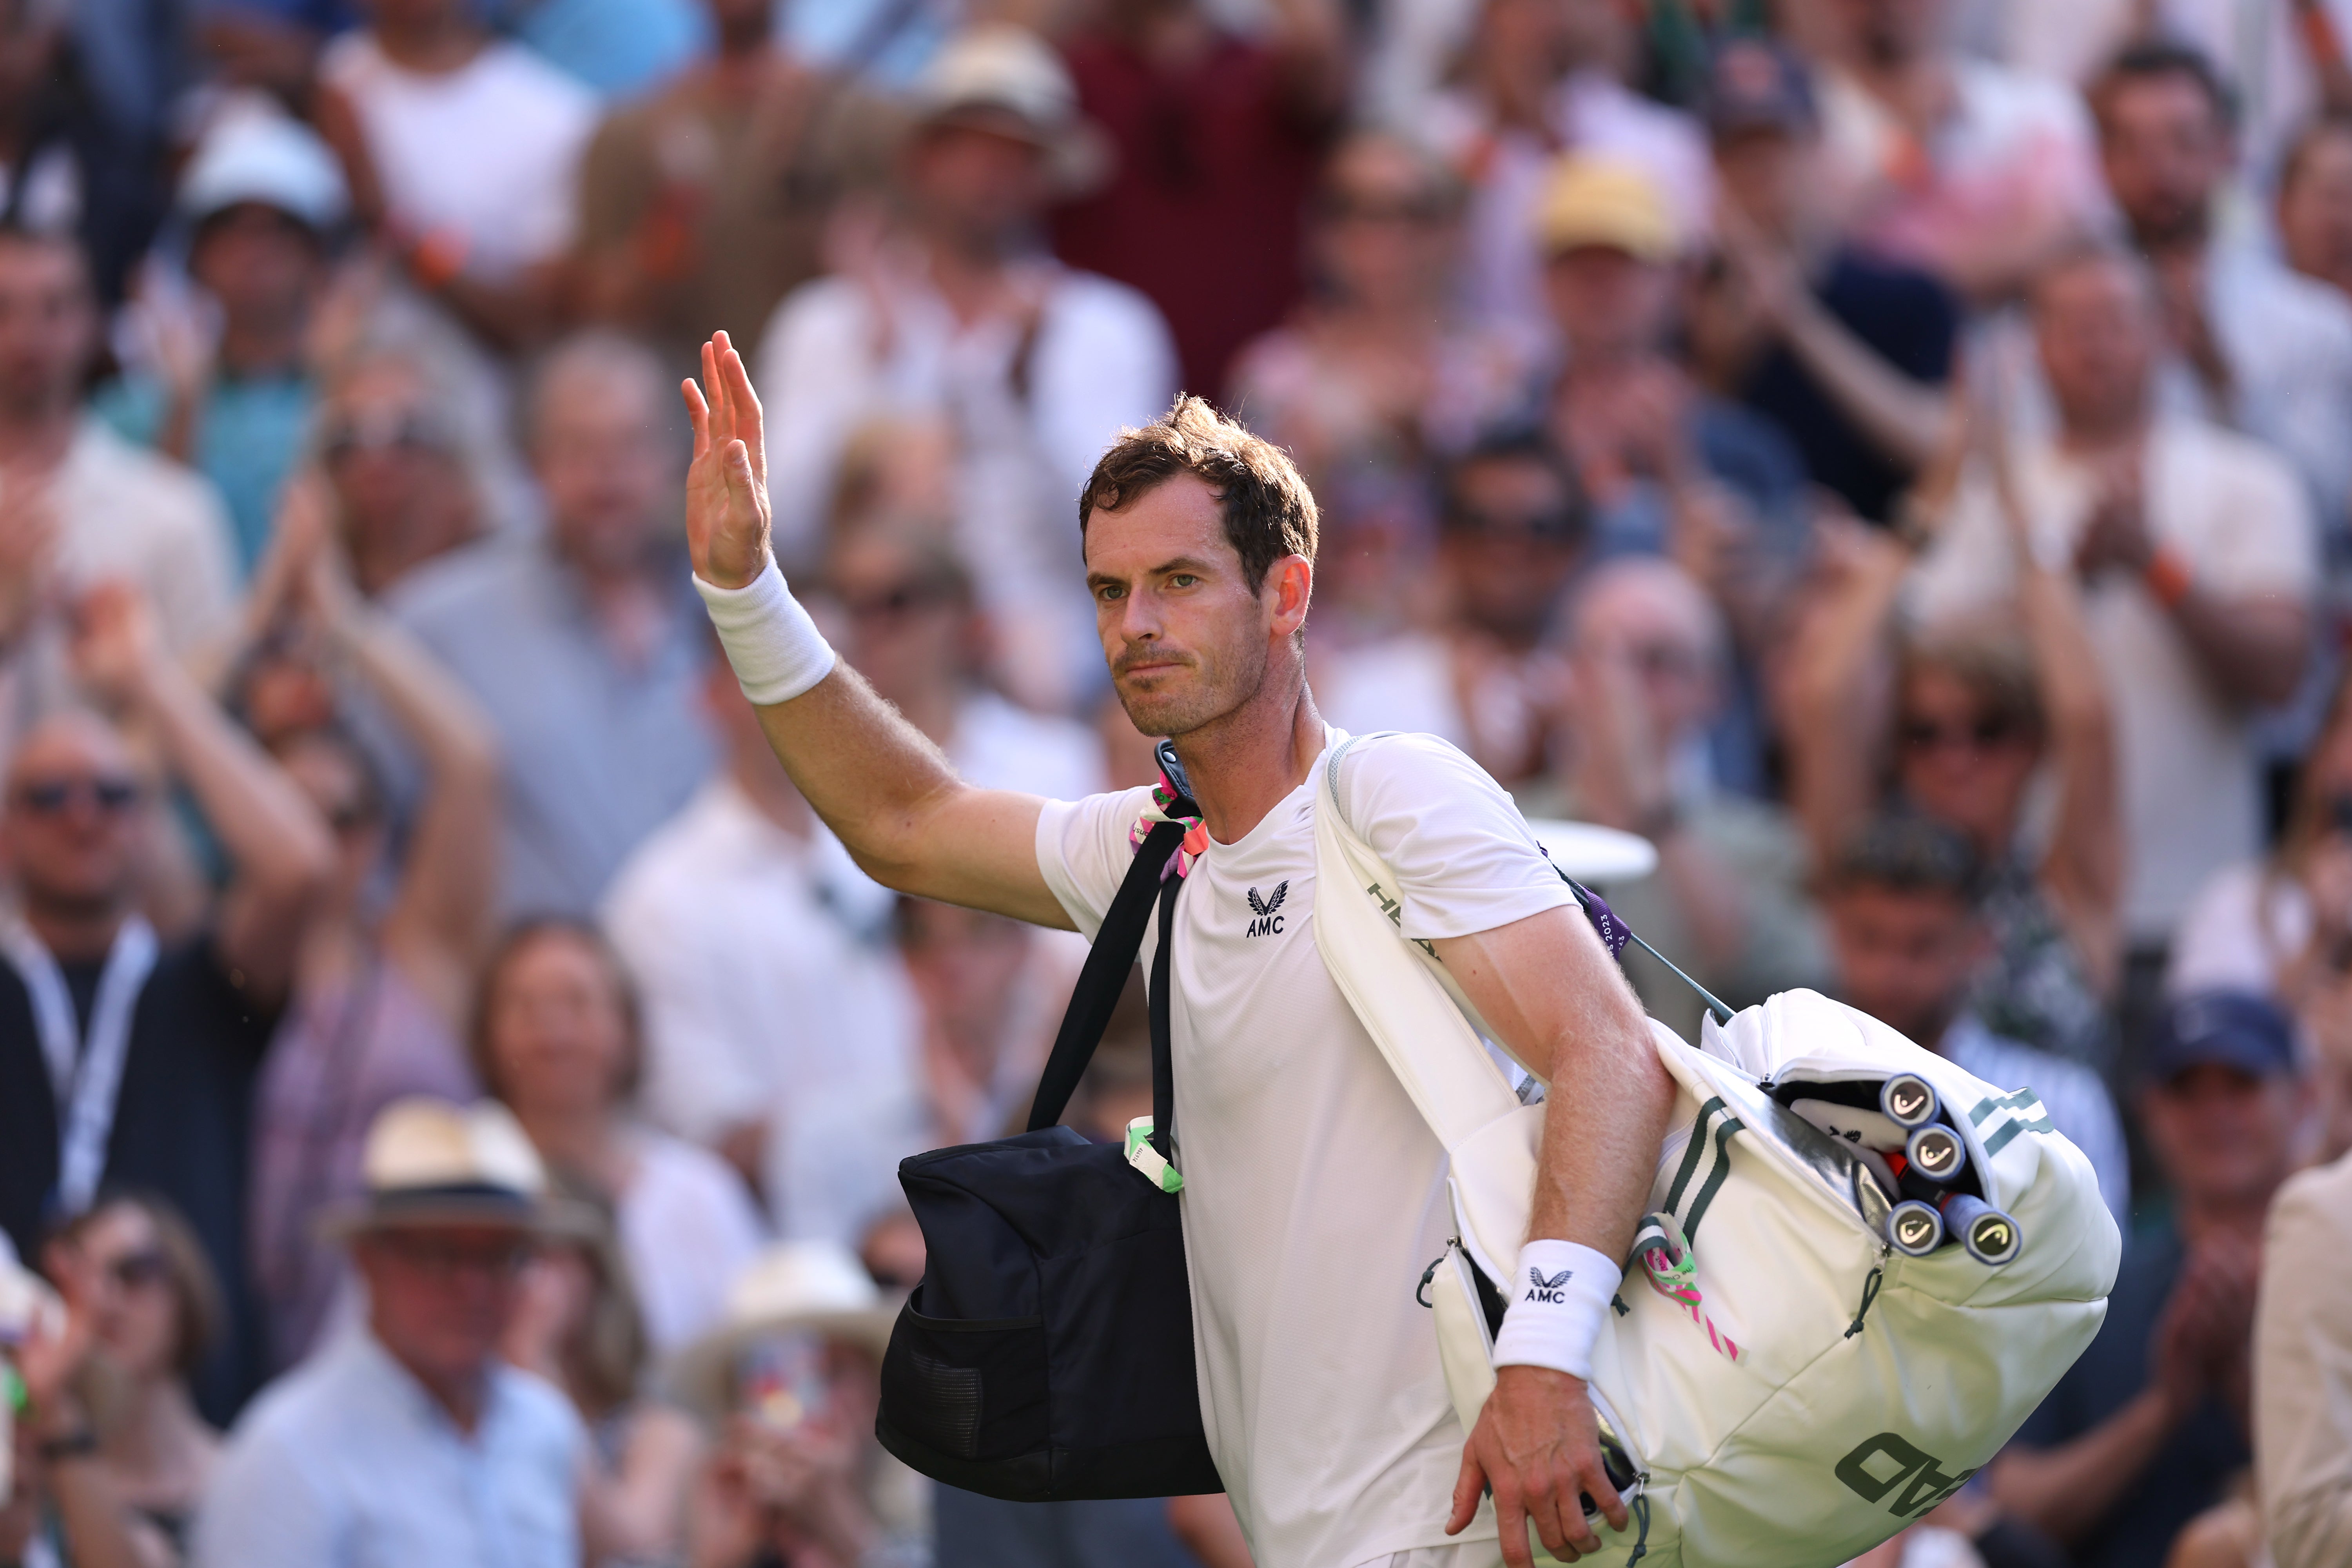 Andy Murray waves goodbye after his loss to Stefanos Tsitsipas last year (Steven Paston/PA)